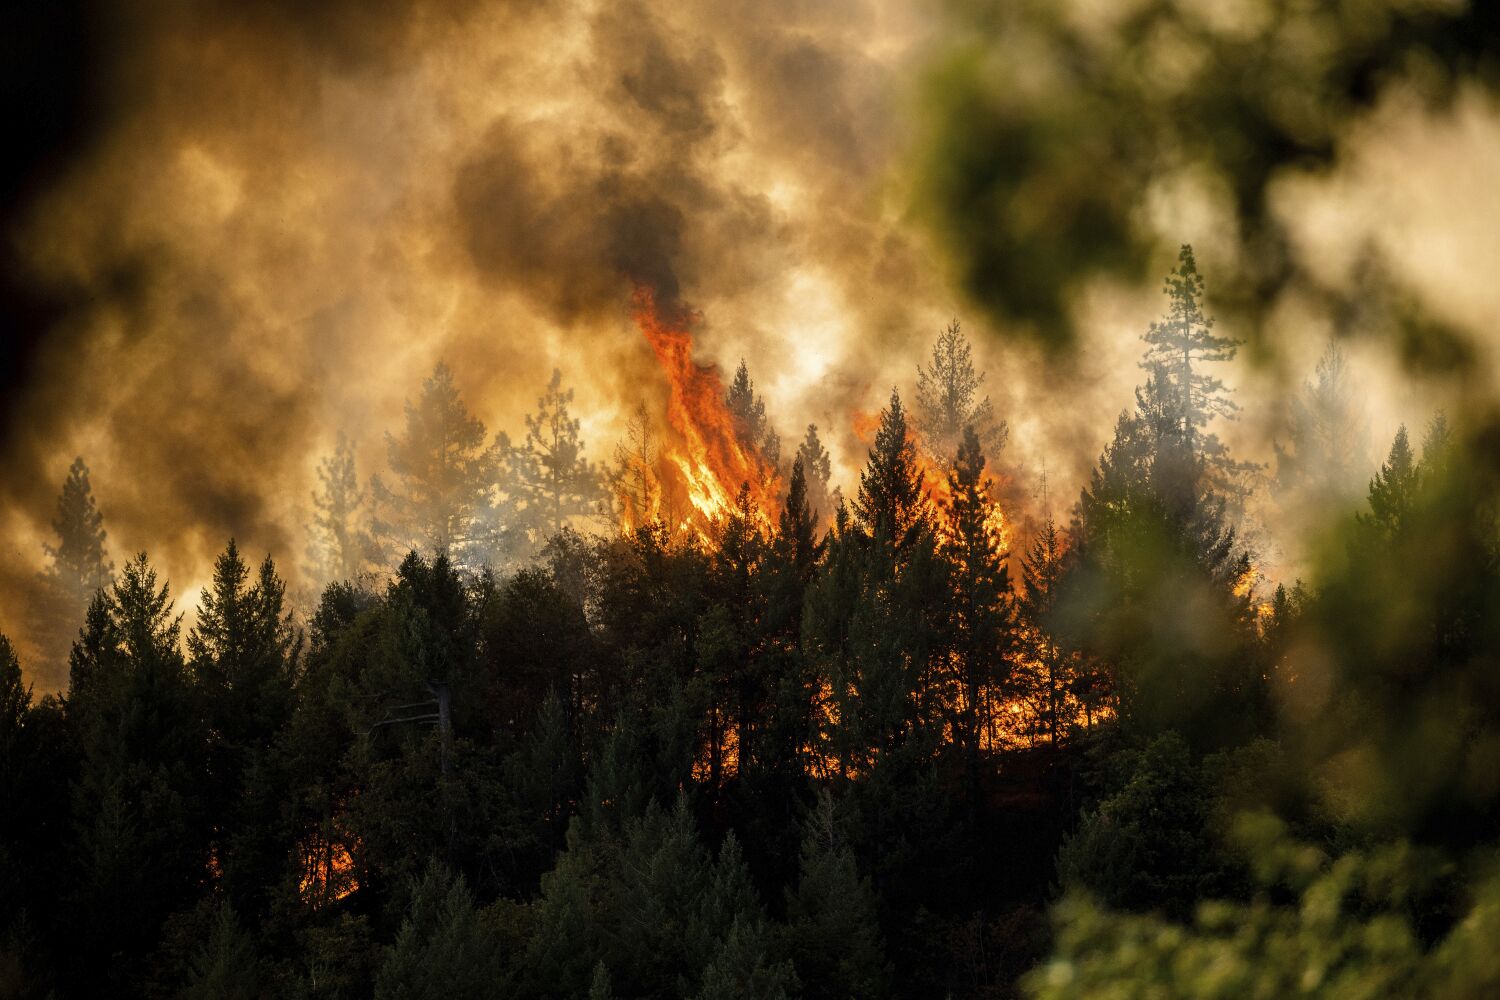 Weekend storms could be a mixed blessing for crews battling California's largest wildfire